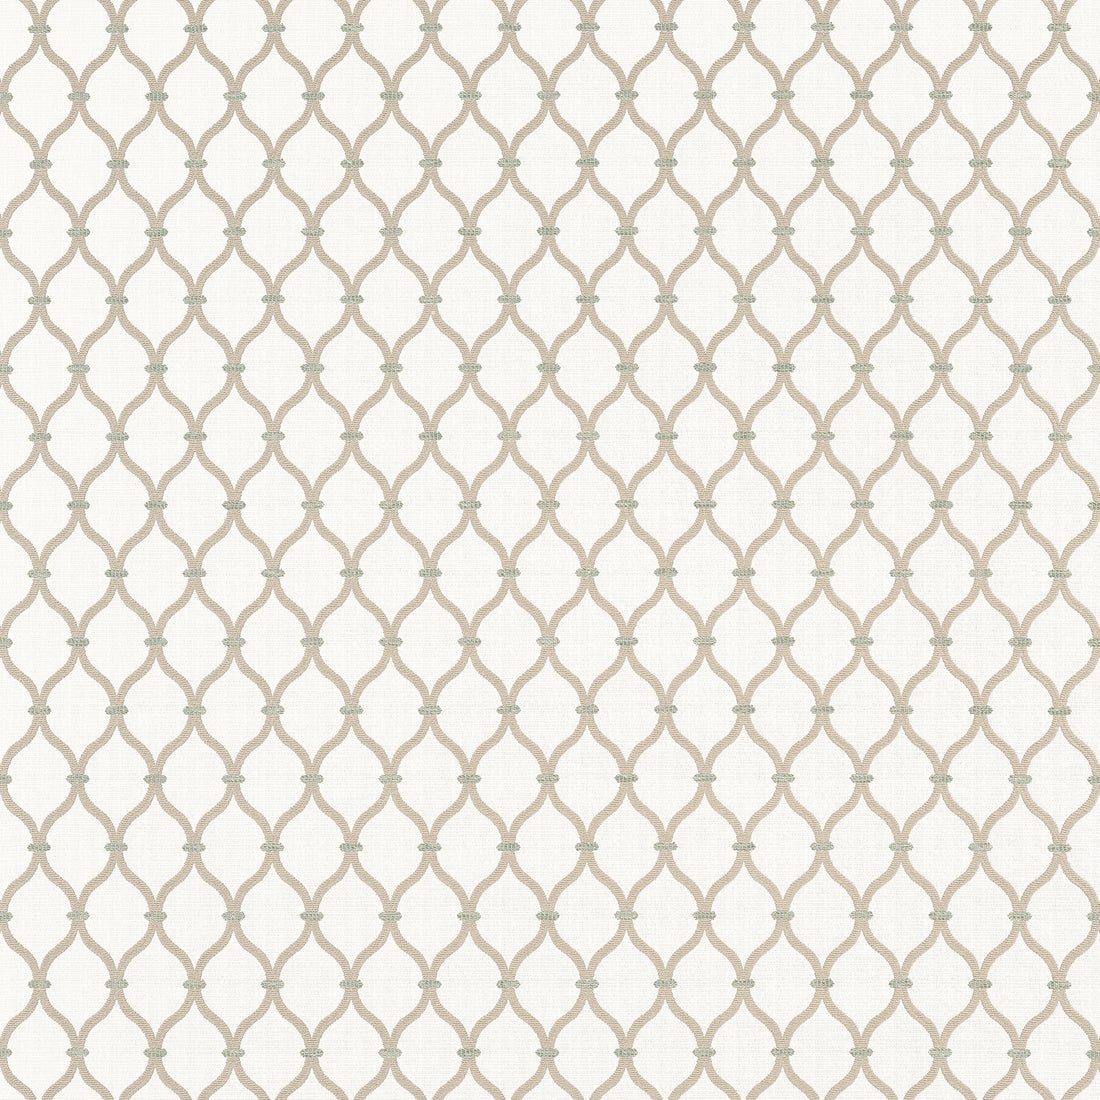 Chandler fabric in flax color - pattern number W81934 - by Thibaut in the Companions collection